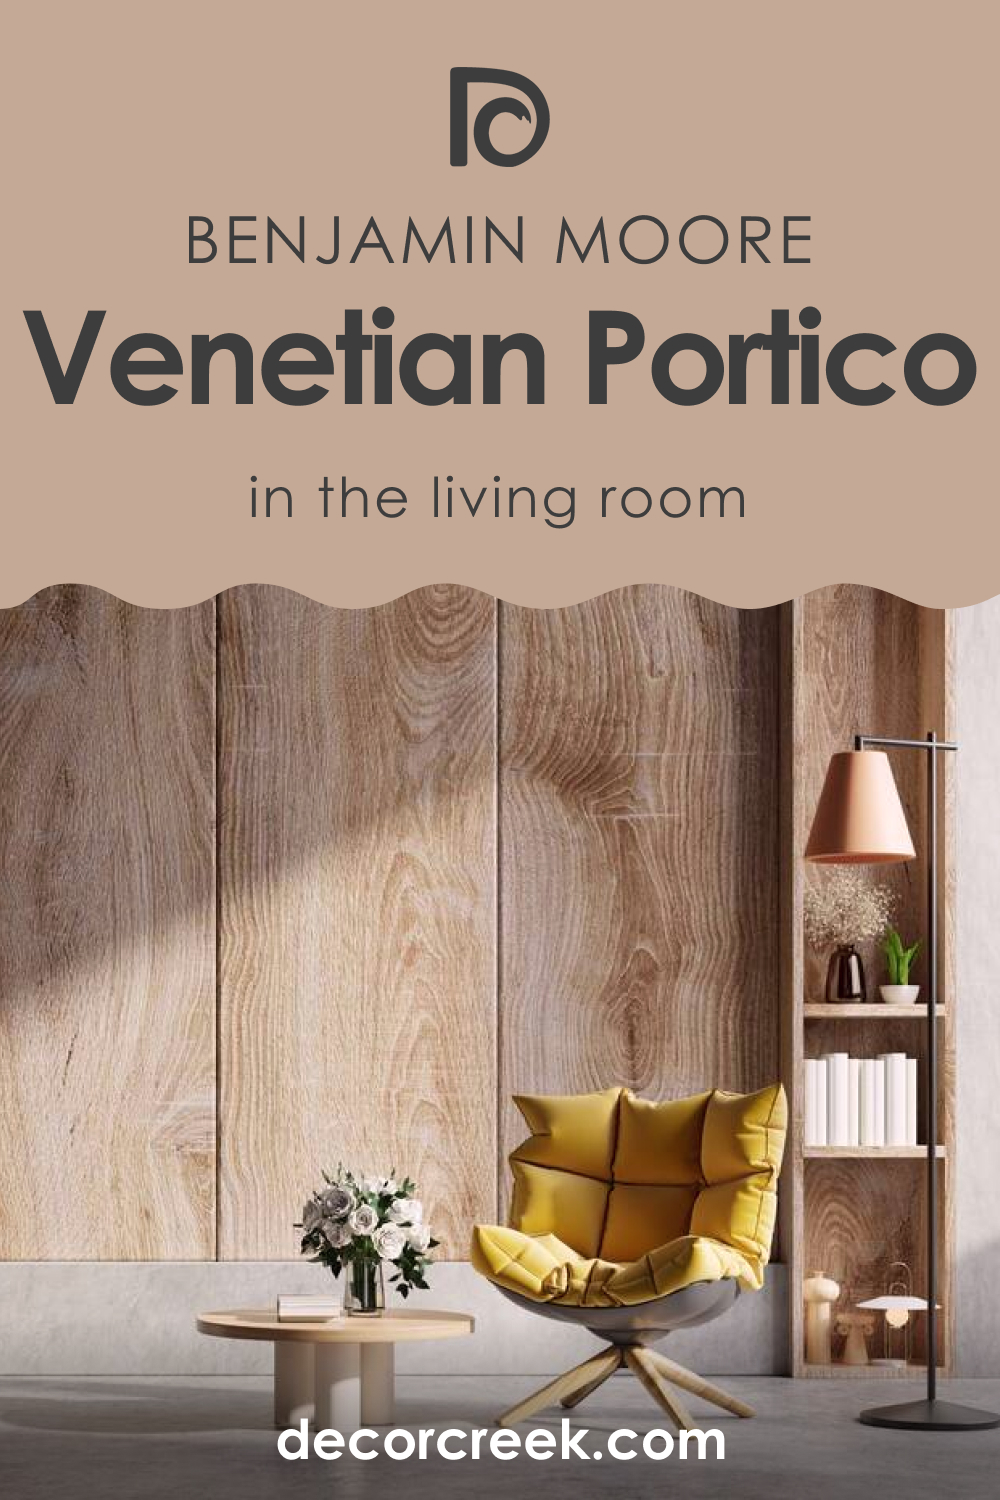 How to Use Venetian Portico AF-185 in the Living Room?